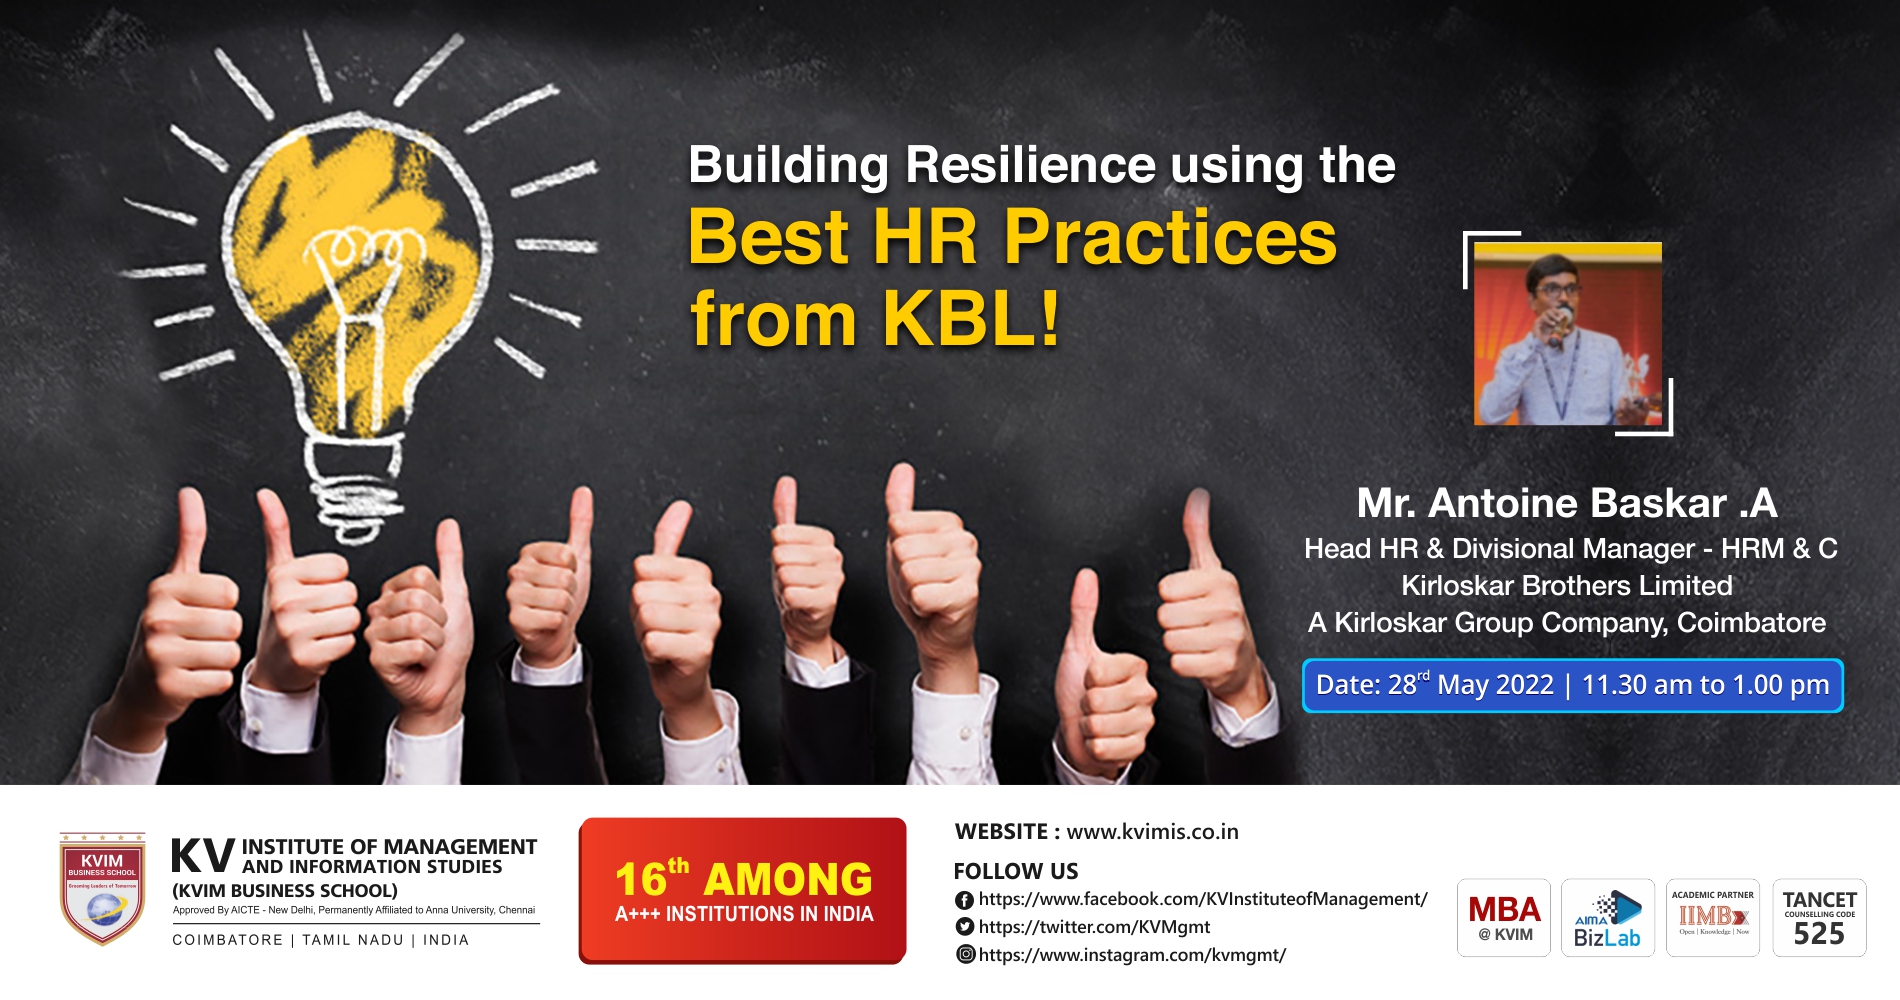 Guest Lecture session on Building Resilience using the Best HR Practices from KBL 2022